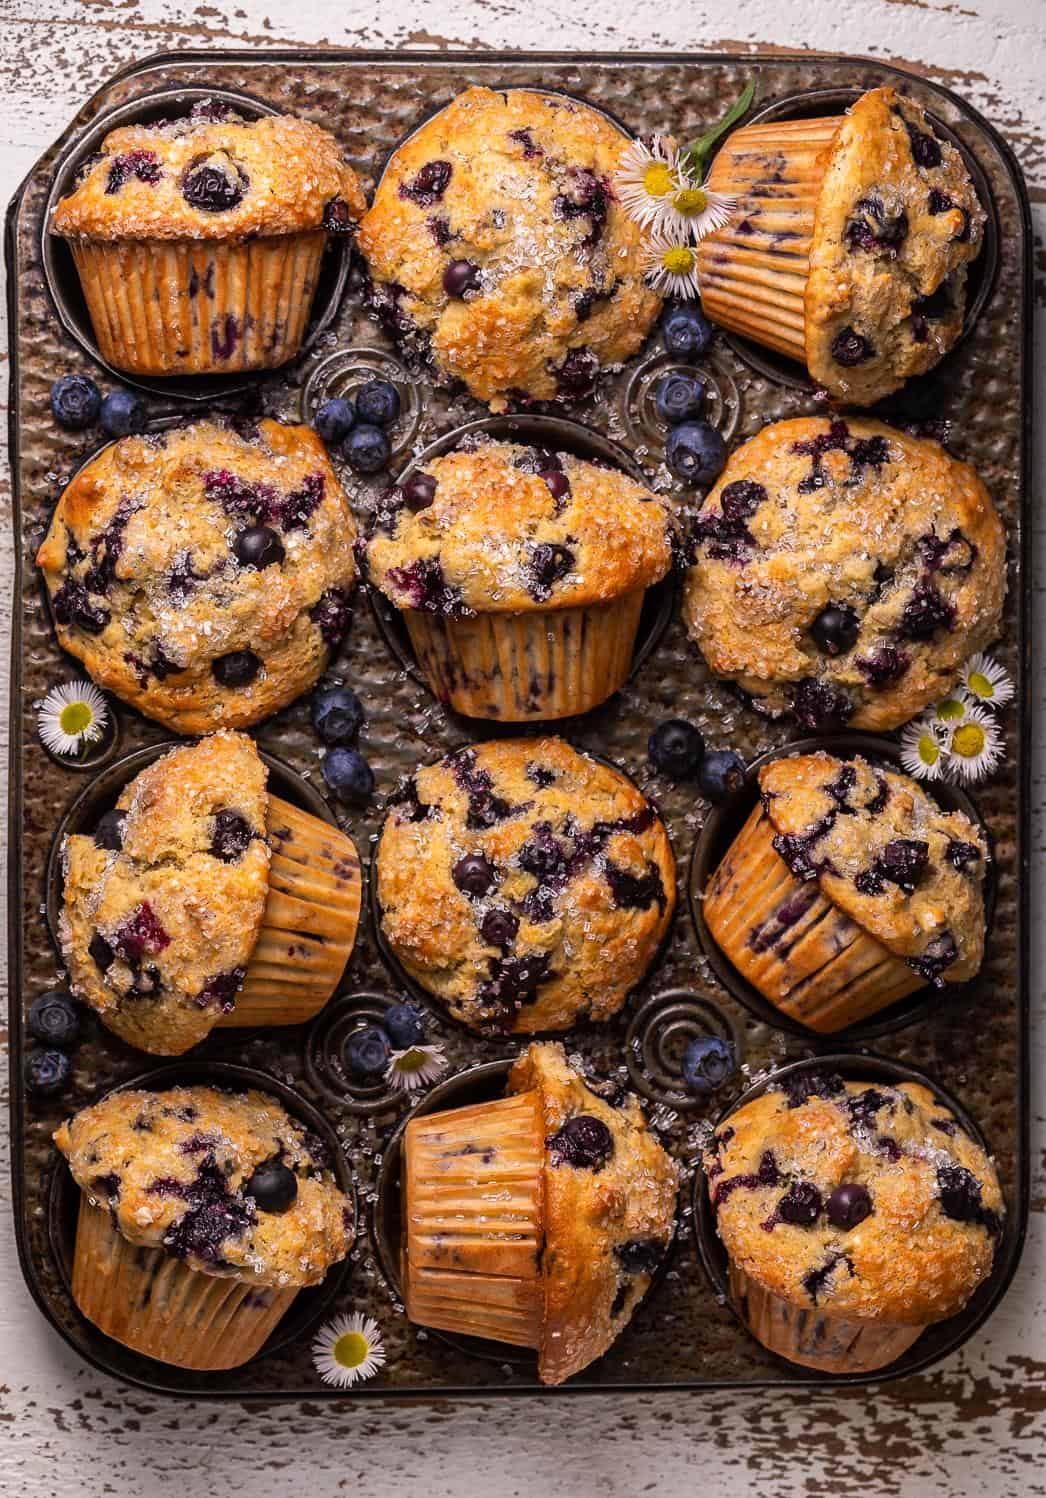   With a soft, cake-like texture and bursting berry bites, these muffins will be your new favorite bakery treat.